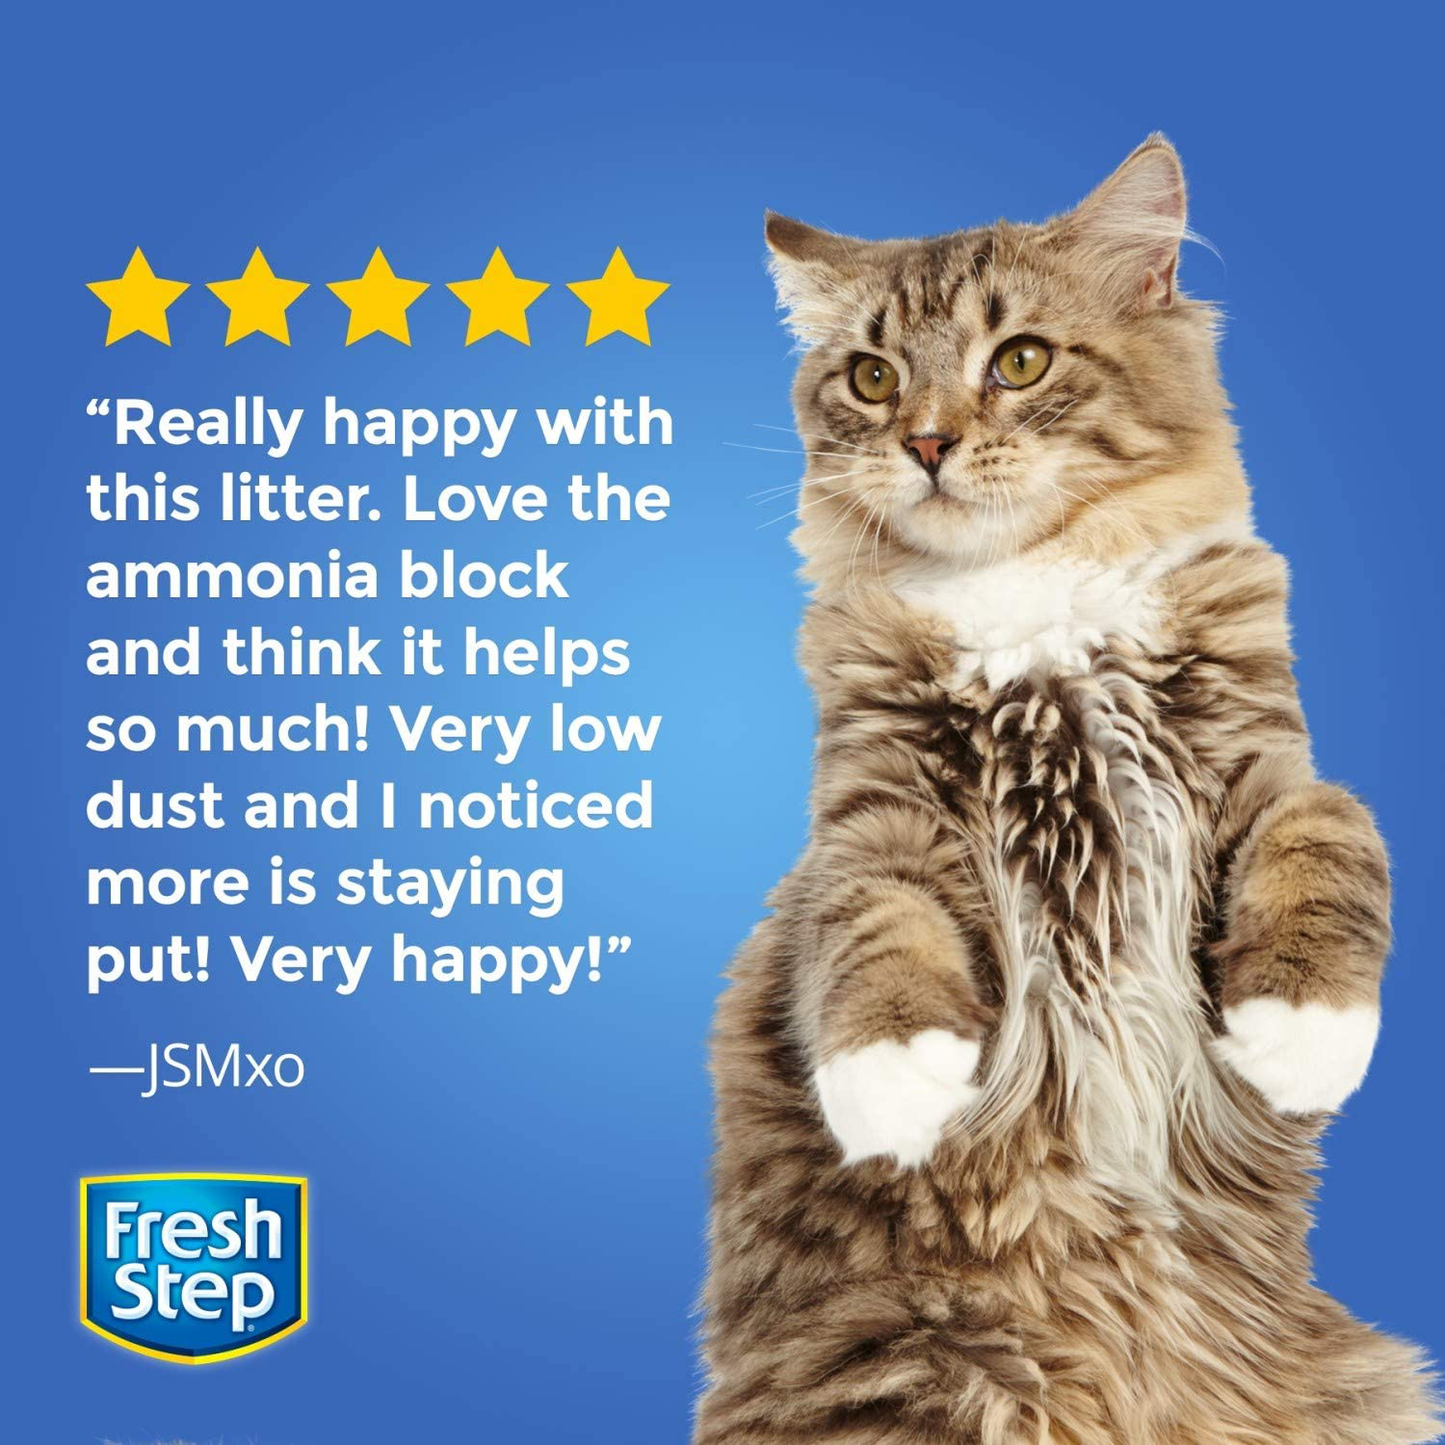 Fresh Step Odor Shield Scented Litter with the Power of Febreze, Clumping Cat Litter, 20 Pounds (Package May Vary) Animals & Pet Supplies > Pet Supplies > Cat Supplies > Cat Litter Fresh Step   